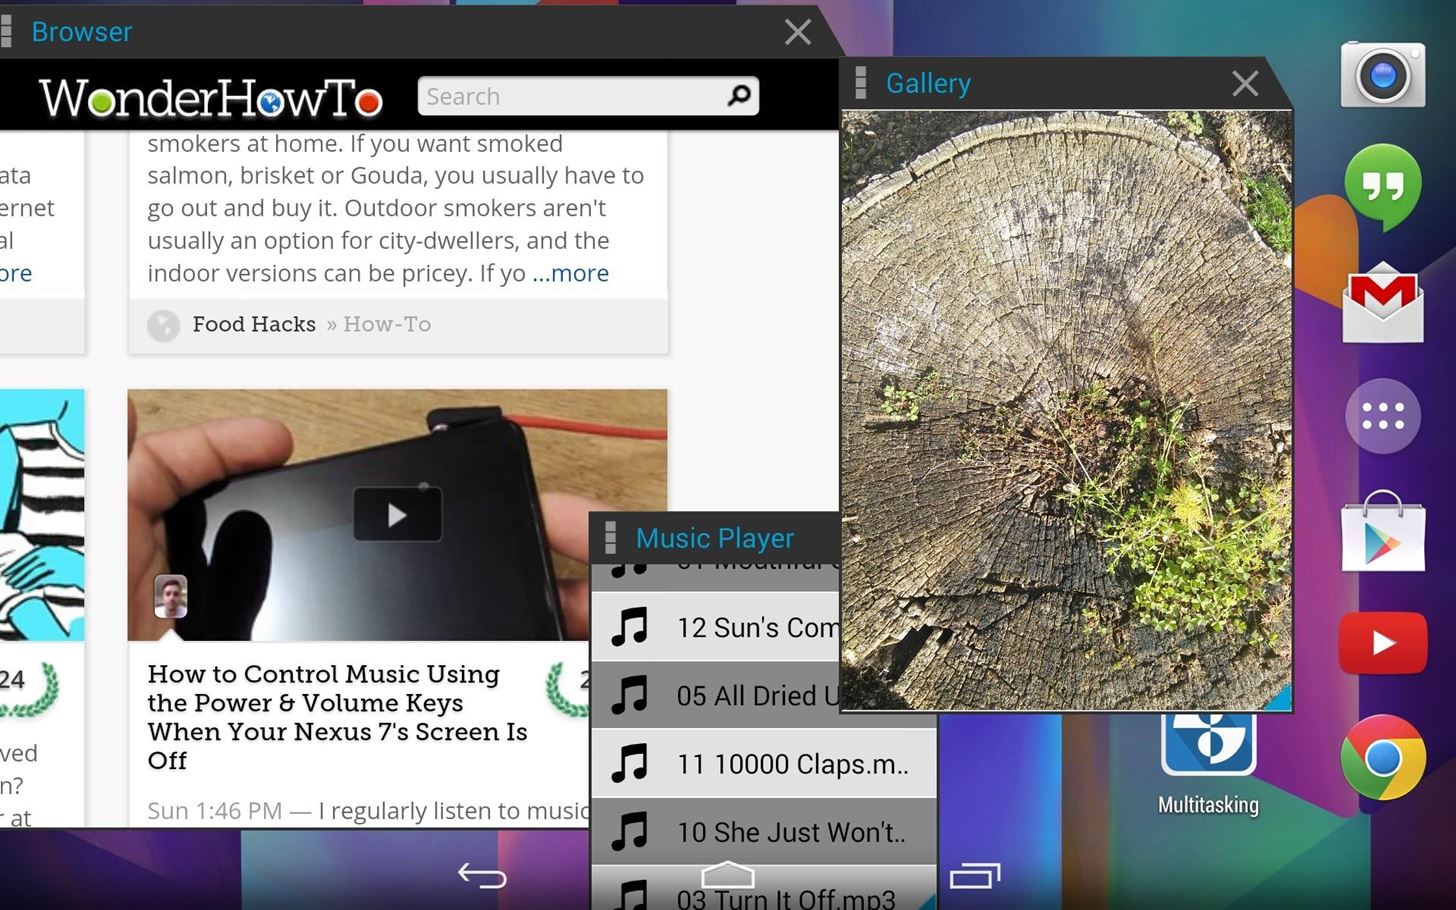 Extreme Multitasking: How to Run Multiple Apps at the Same Time on Your Nexus 7 (No Root Required)